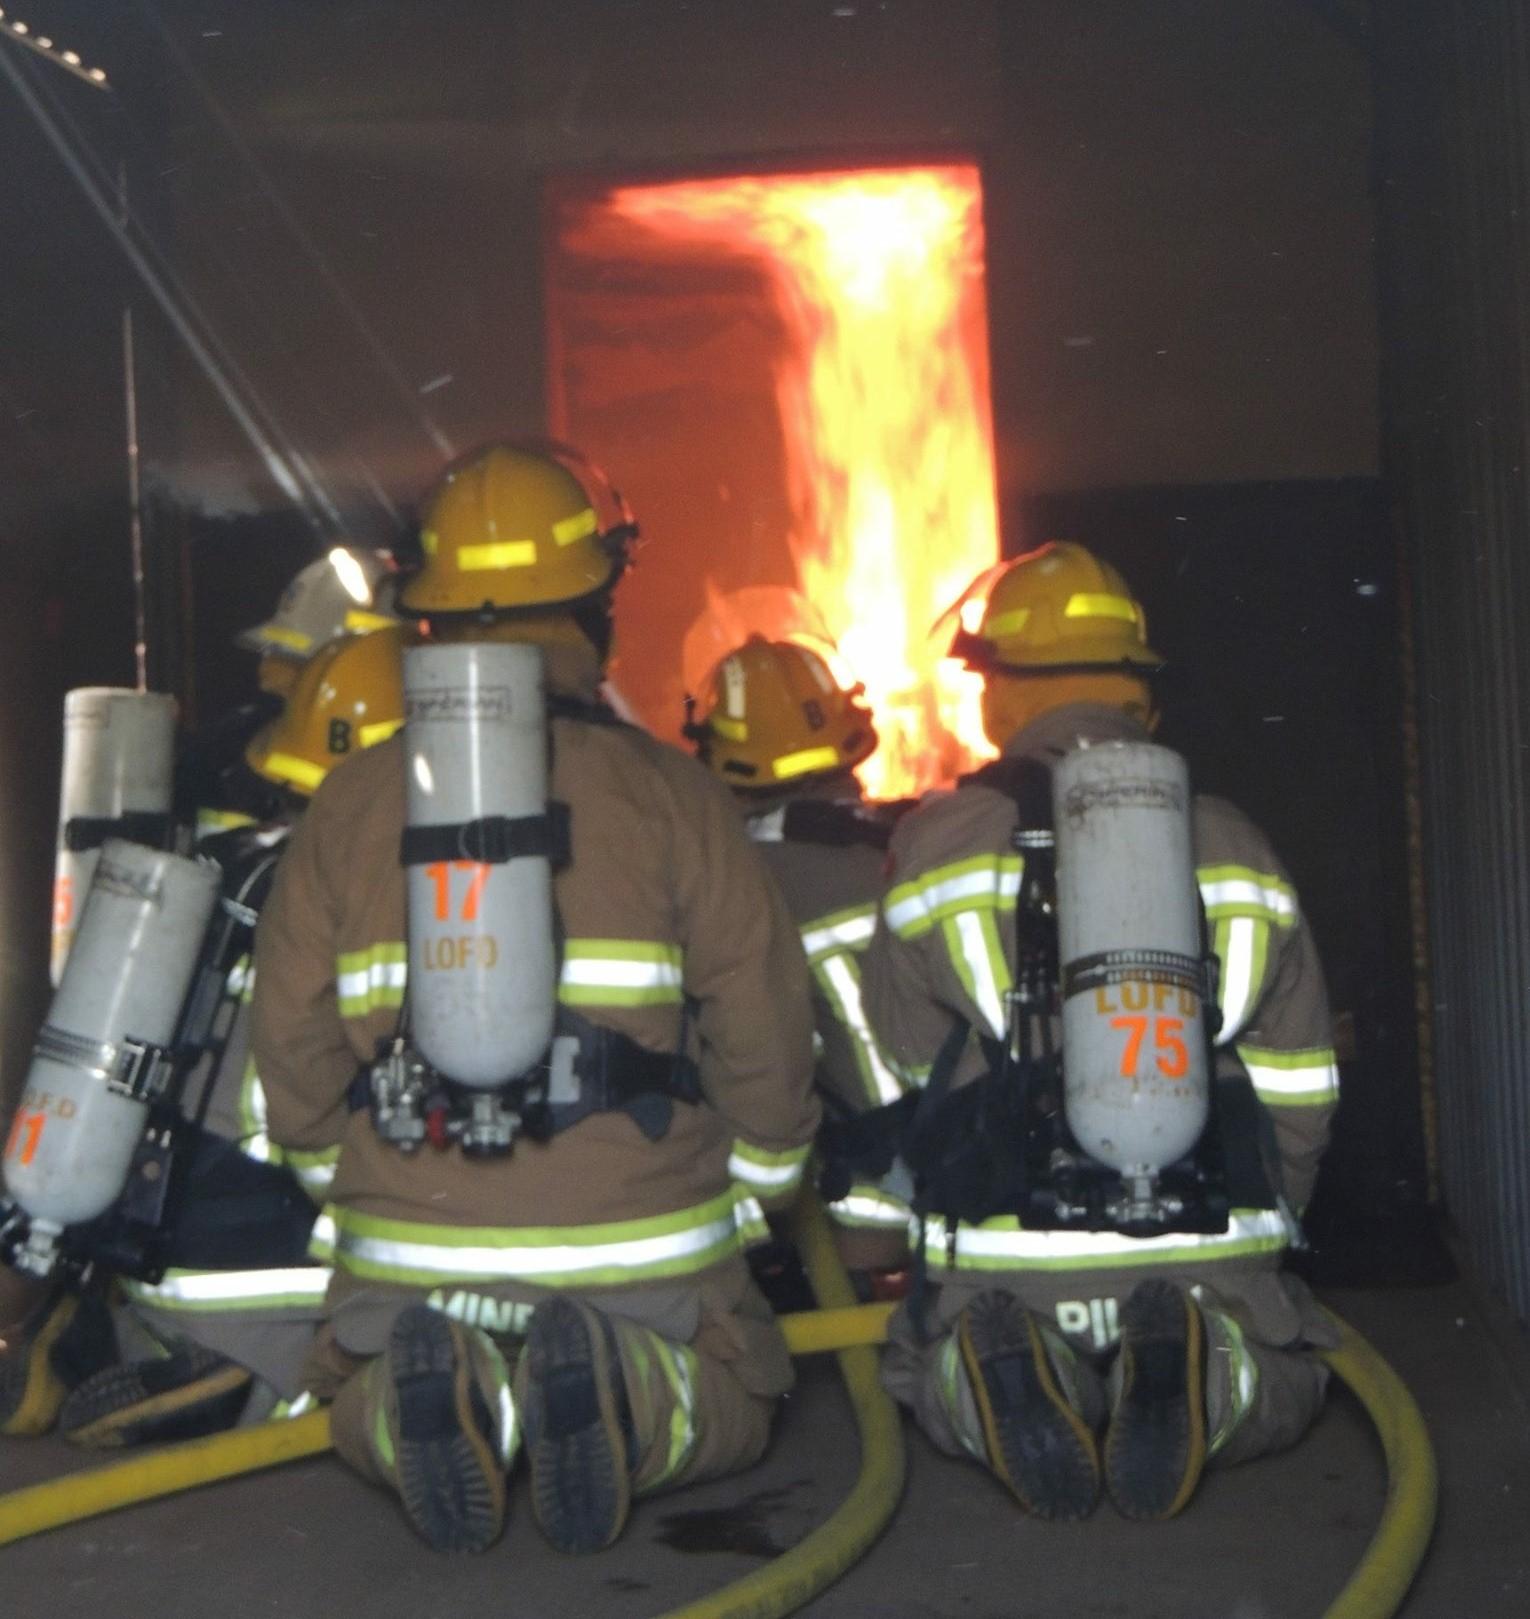 L’Orignal Fire Department’s training facility helps improve skills of firefighters throughout the region